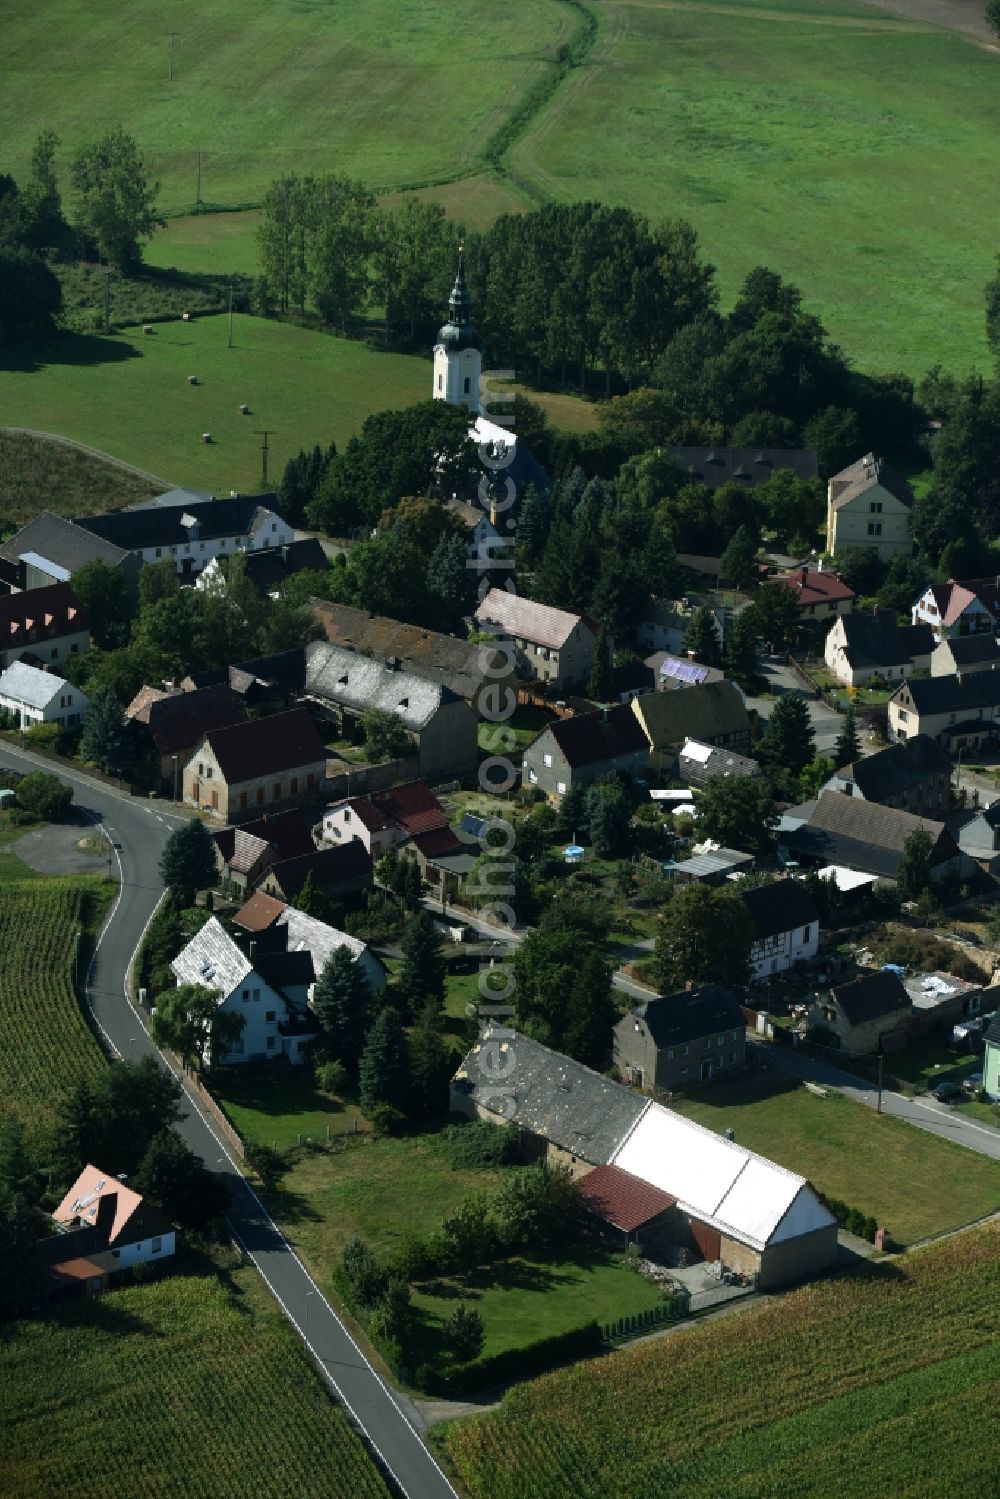 Müglenz from the bird's eye view: View of the village of Mueglenz in the state of Saxony. The village church is located on the Western edge of the village